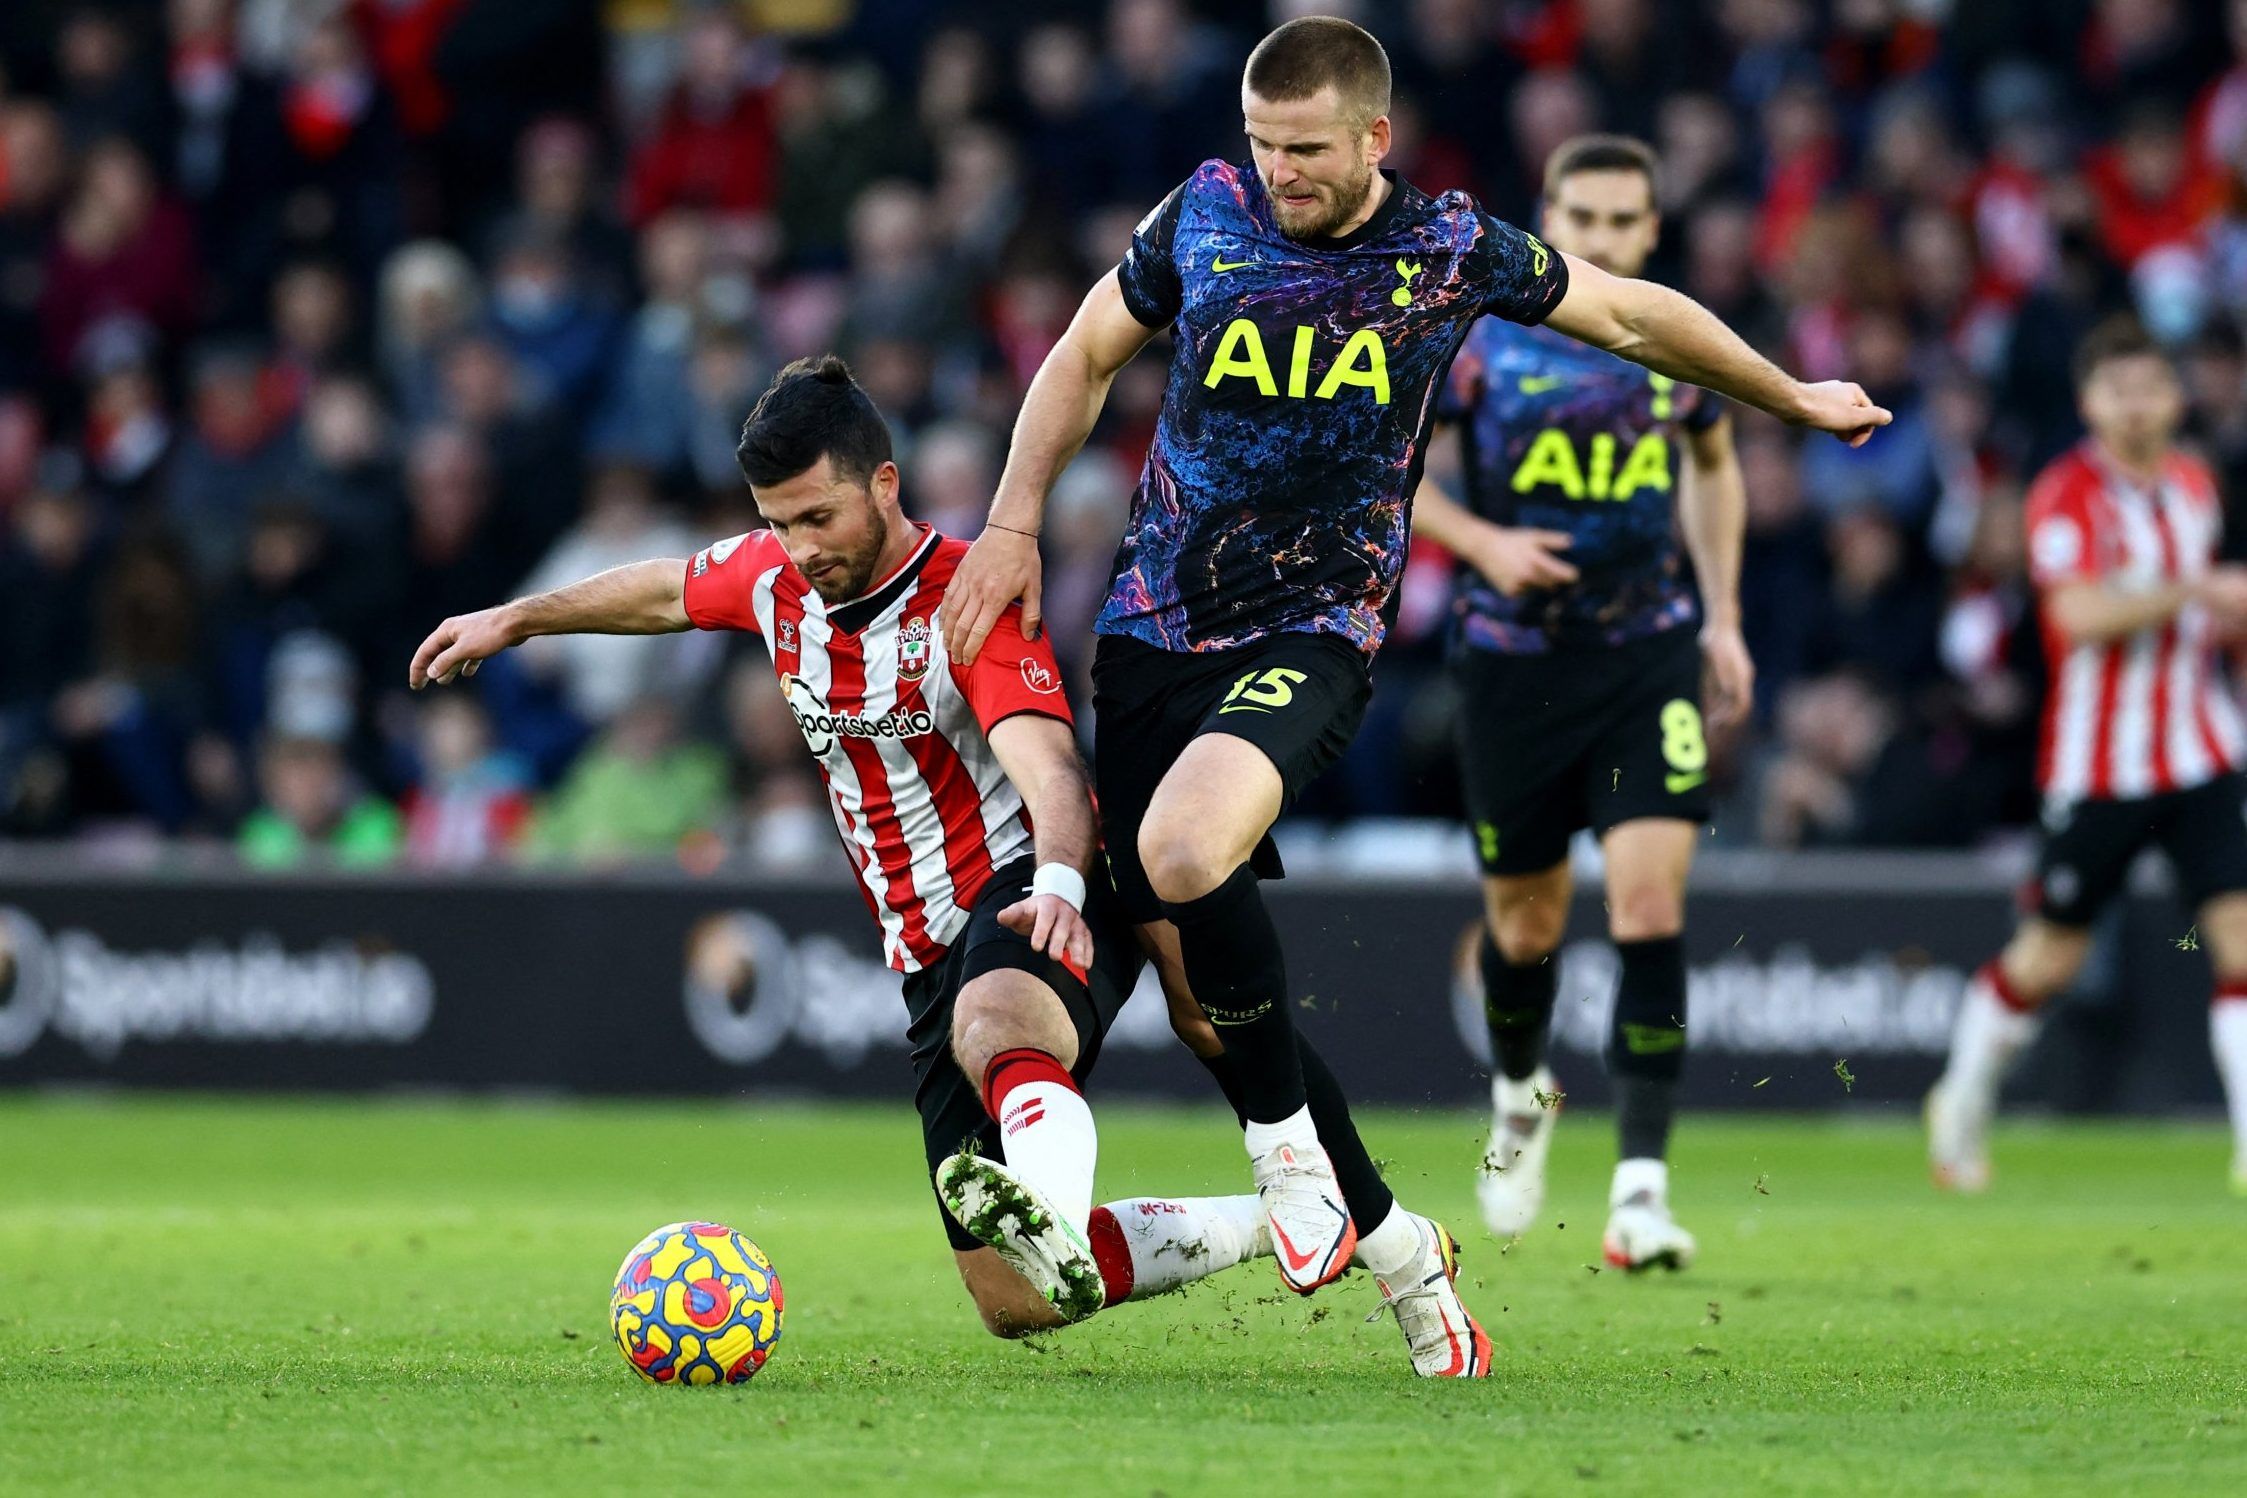 Spurs defender Eric Dier in action against Southampton in the Premier League